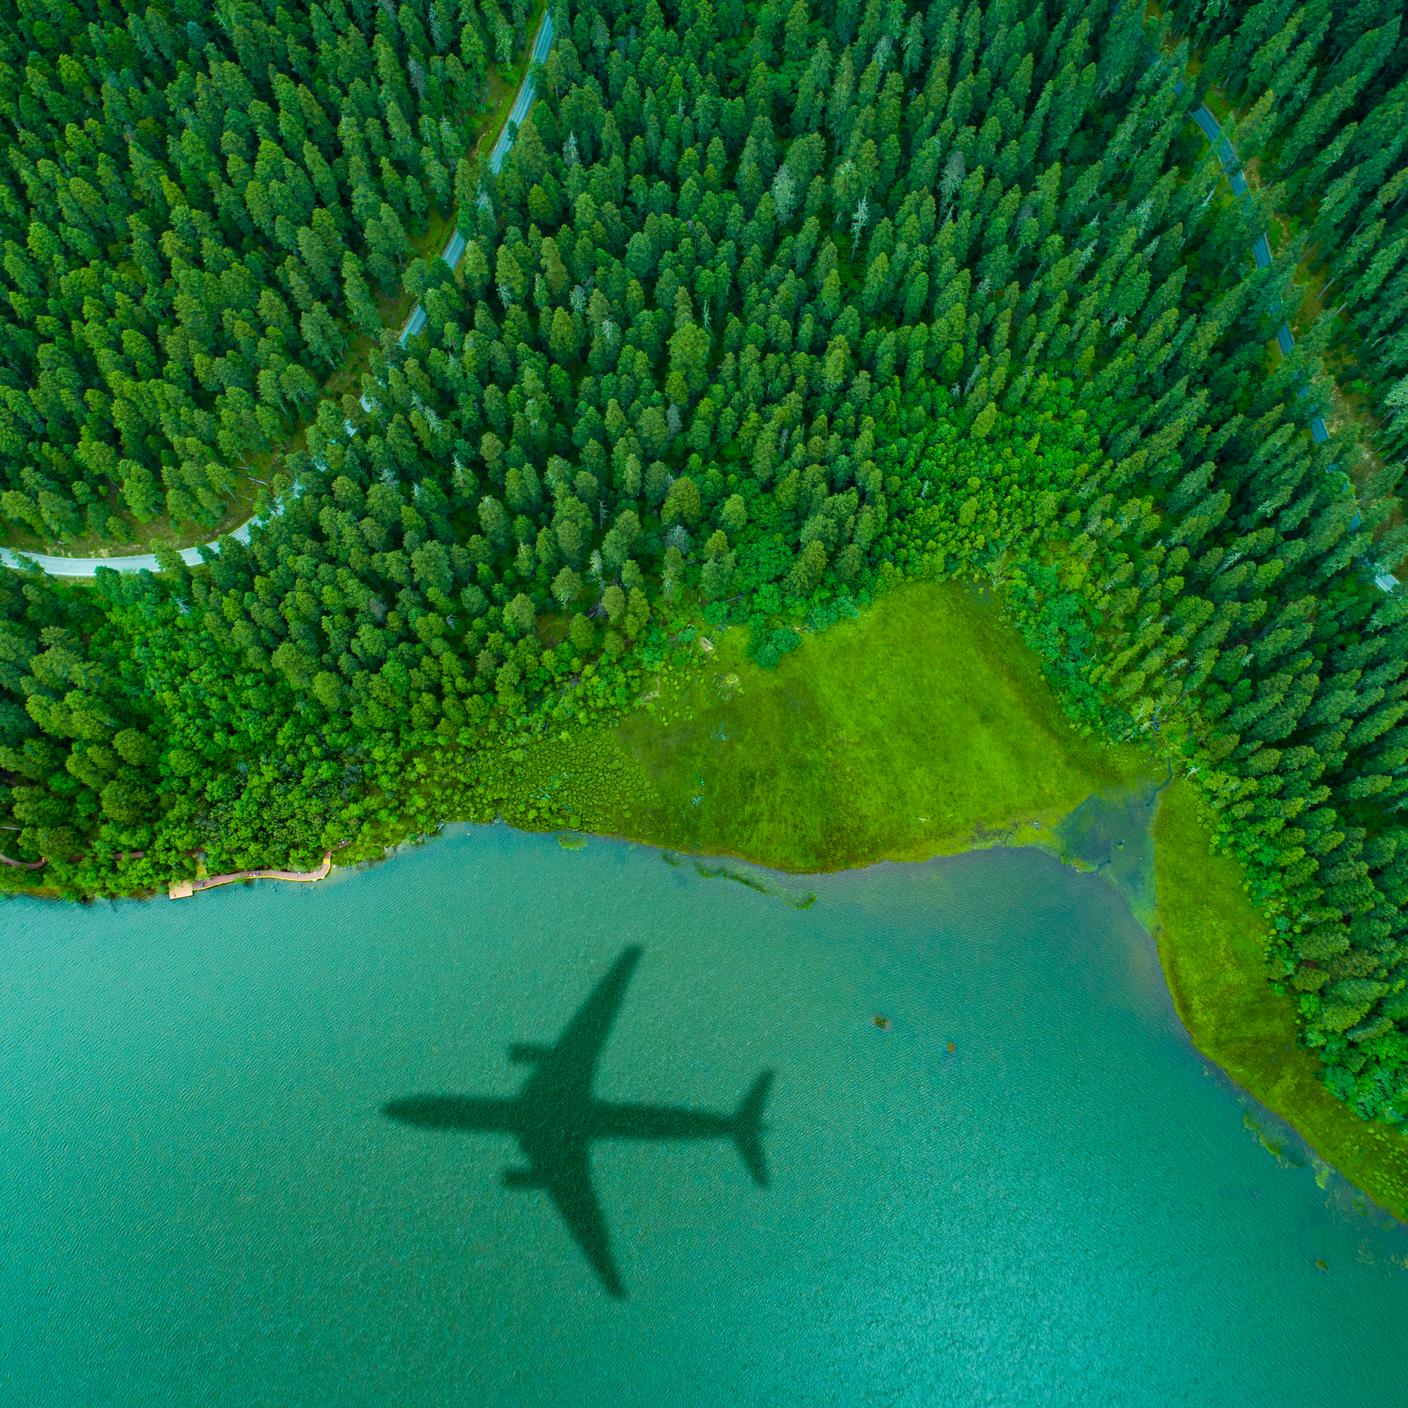 Airplane shadow over the island forest, green concept